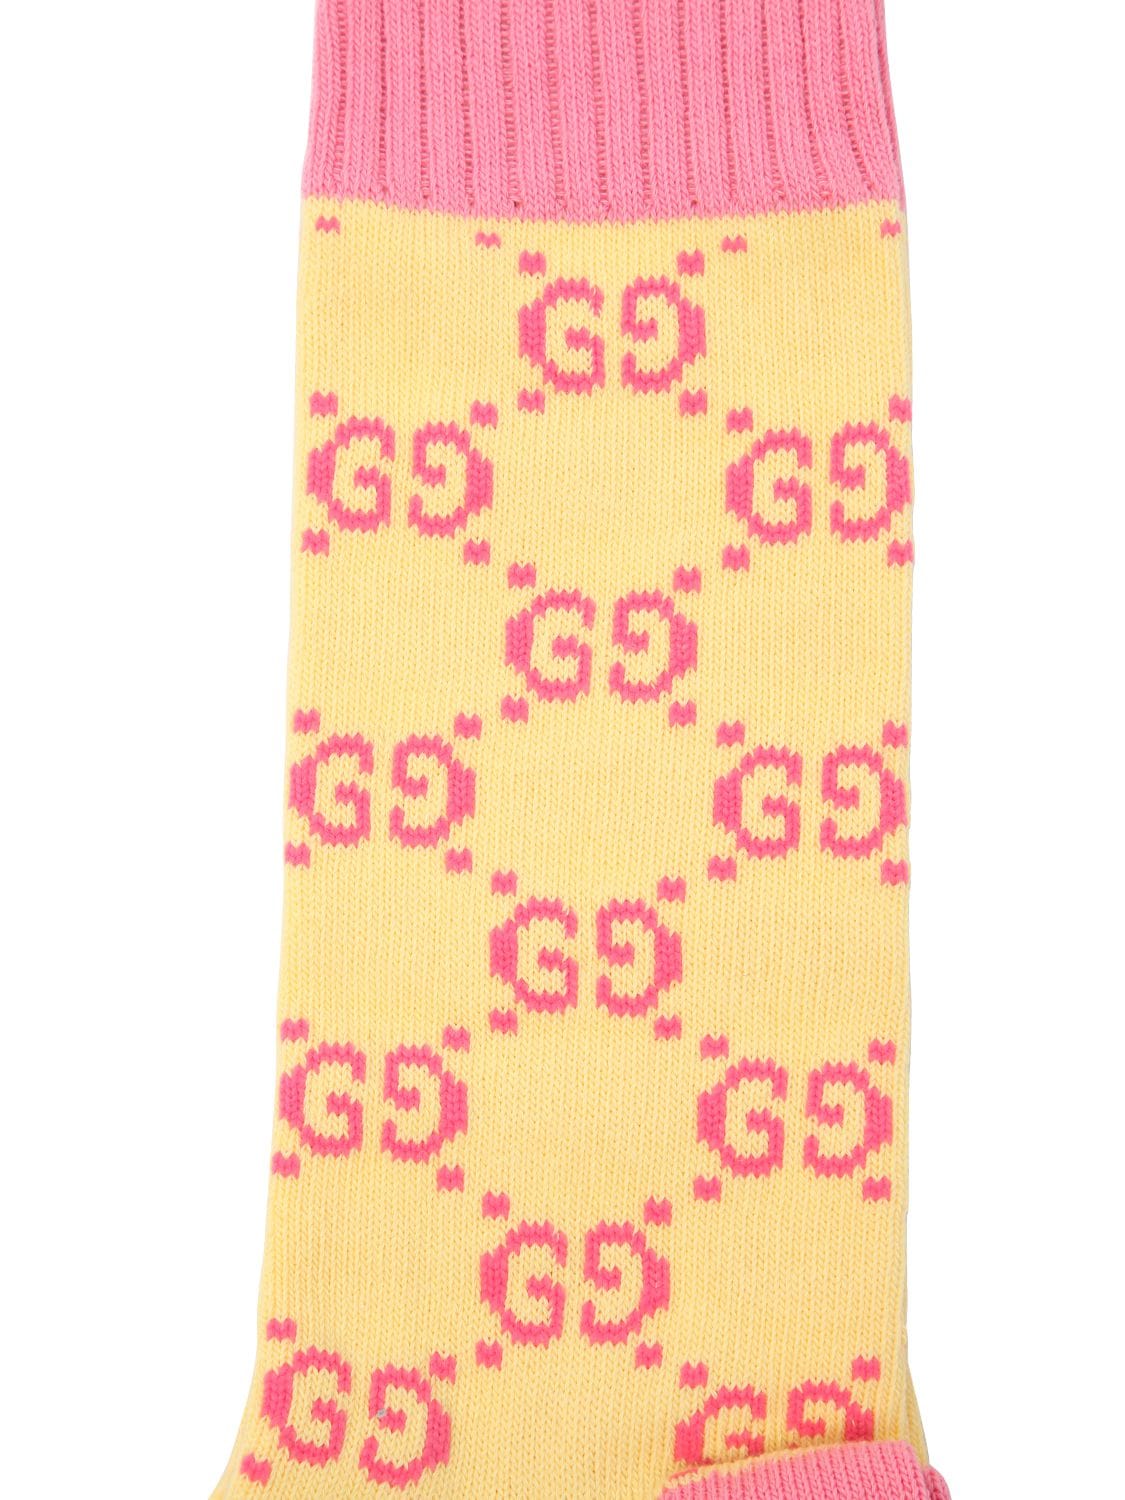 Gucci Gg Supreme Cotton Knee High Socks In Yellow/pink